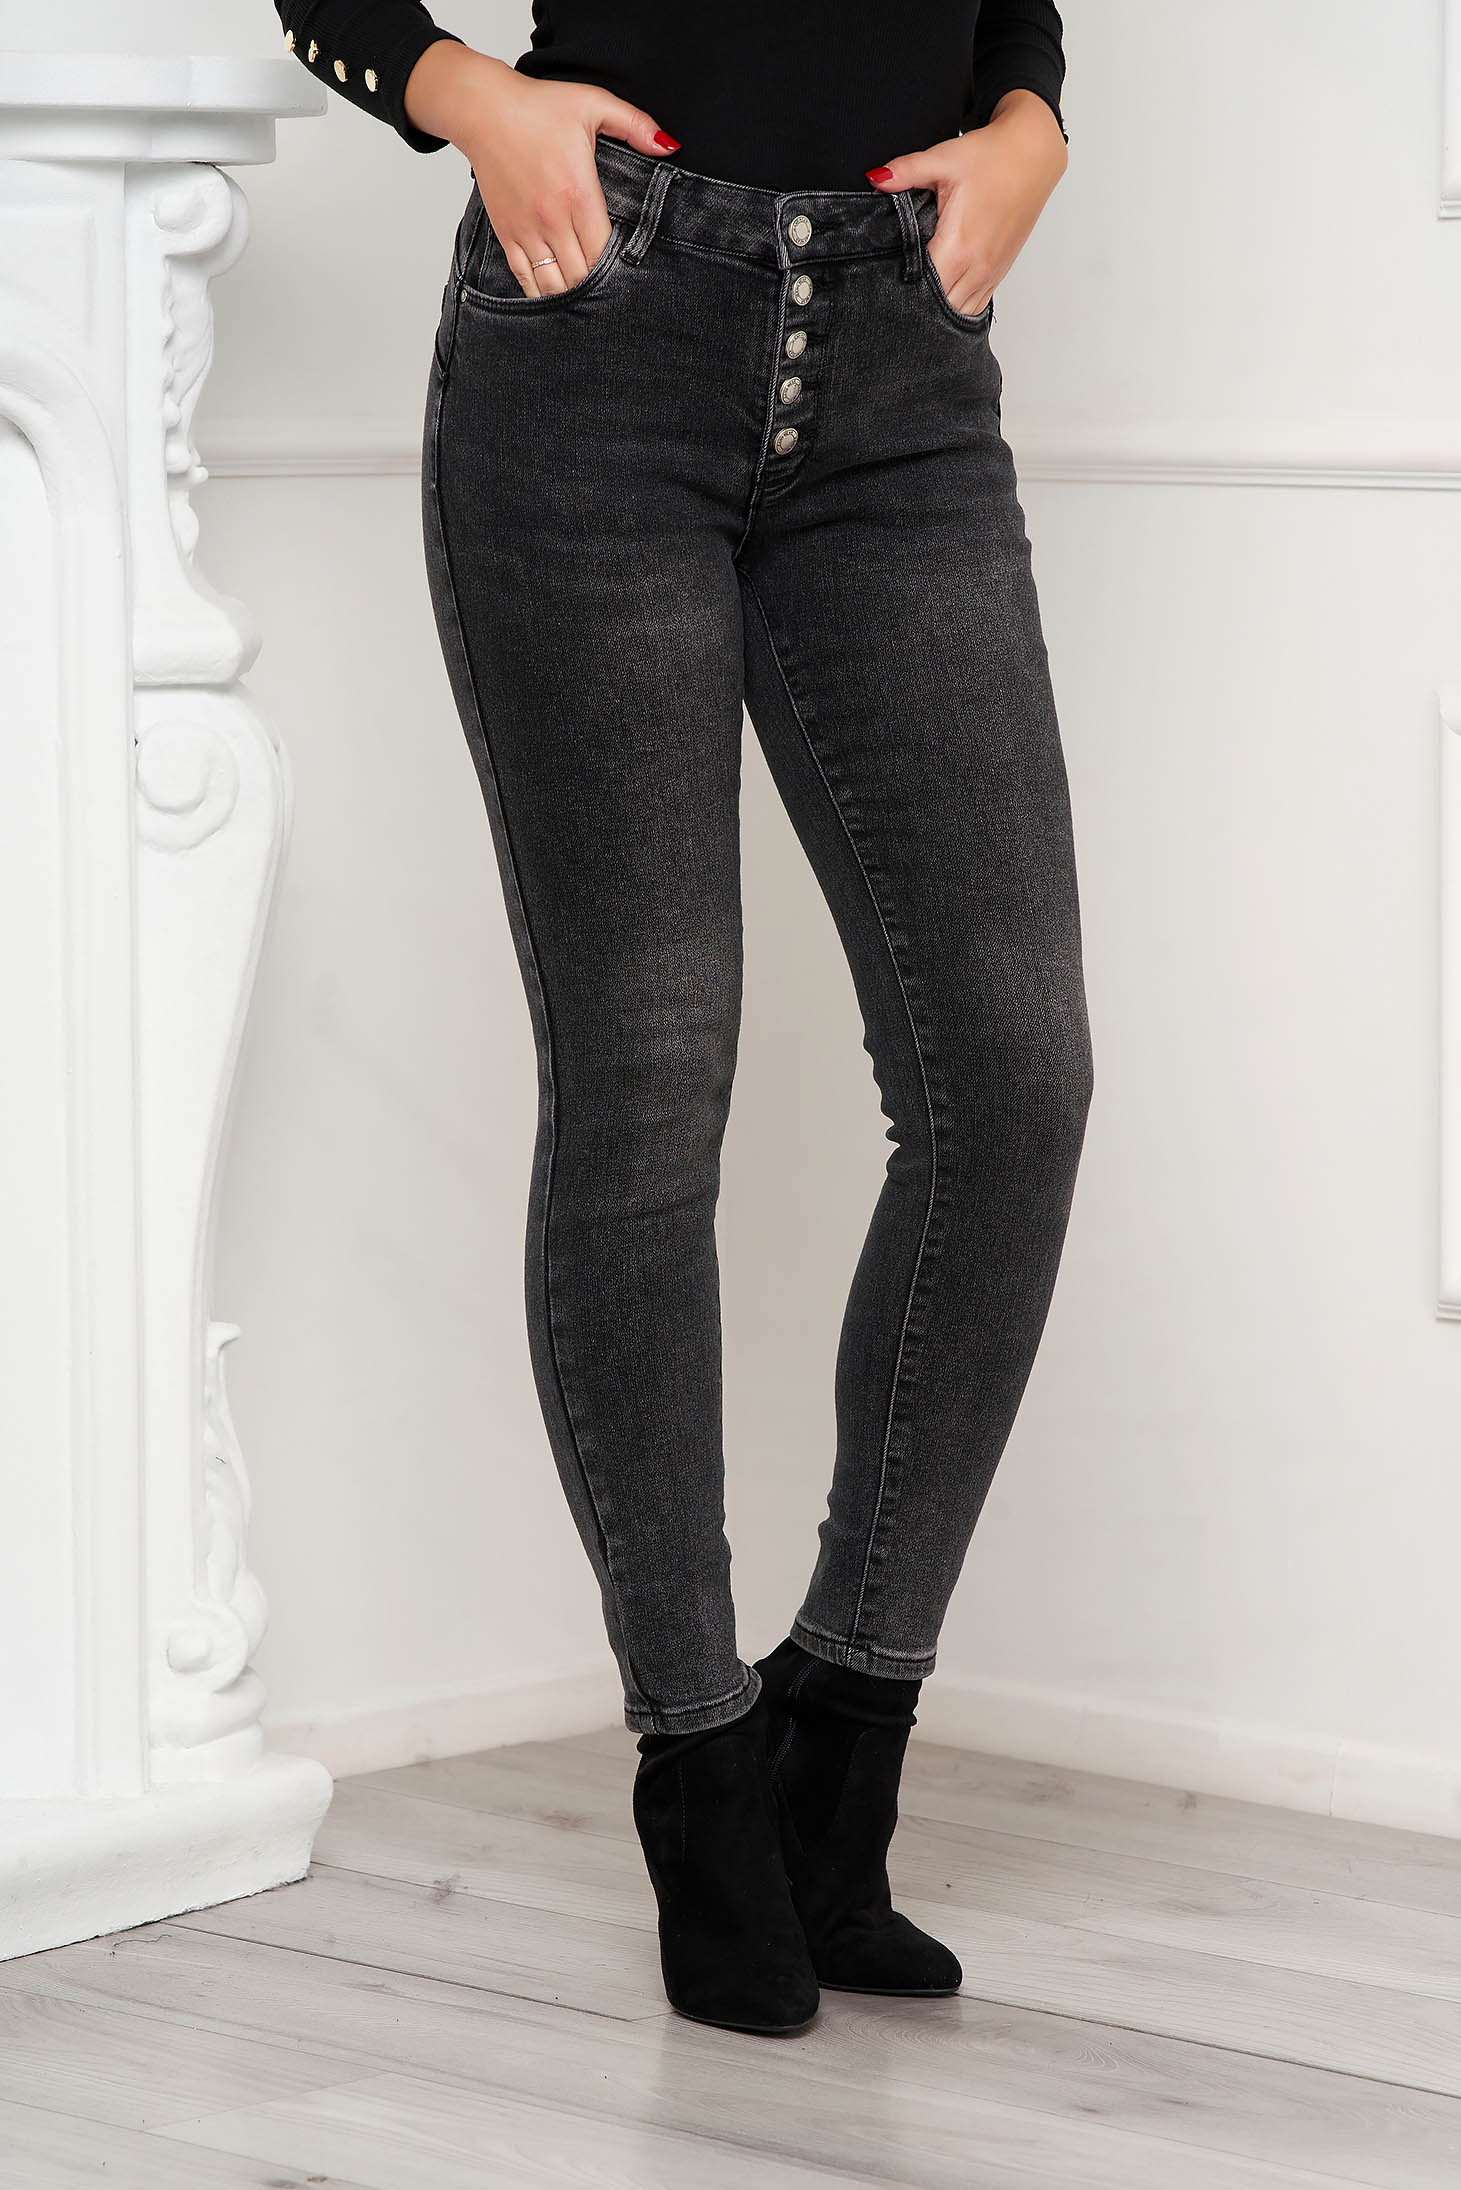 Black jeans high waisted skinny jeans with buttons